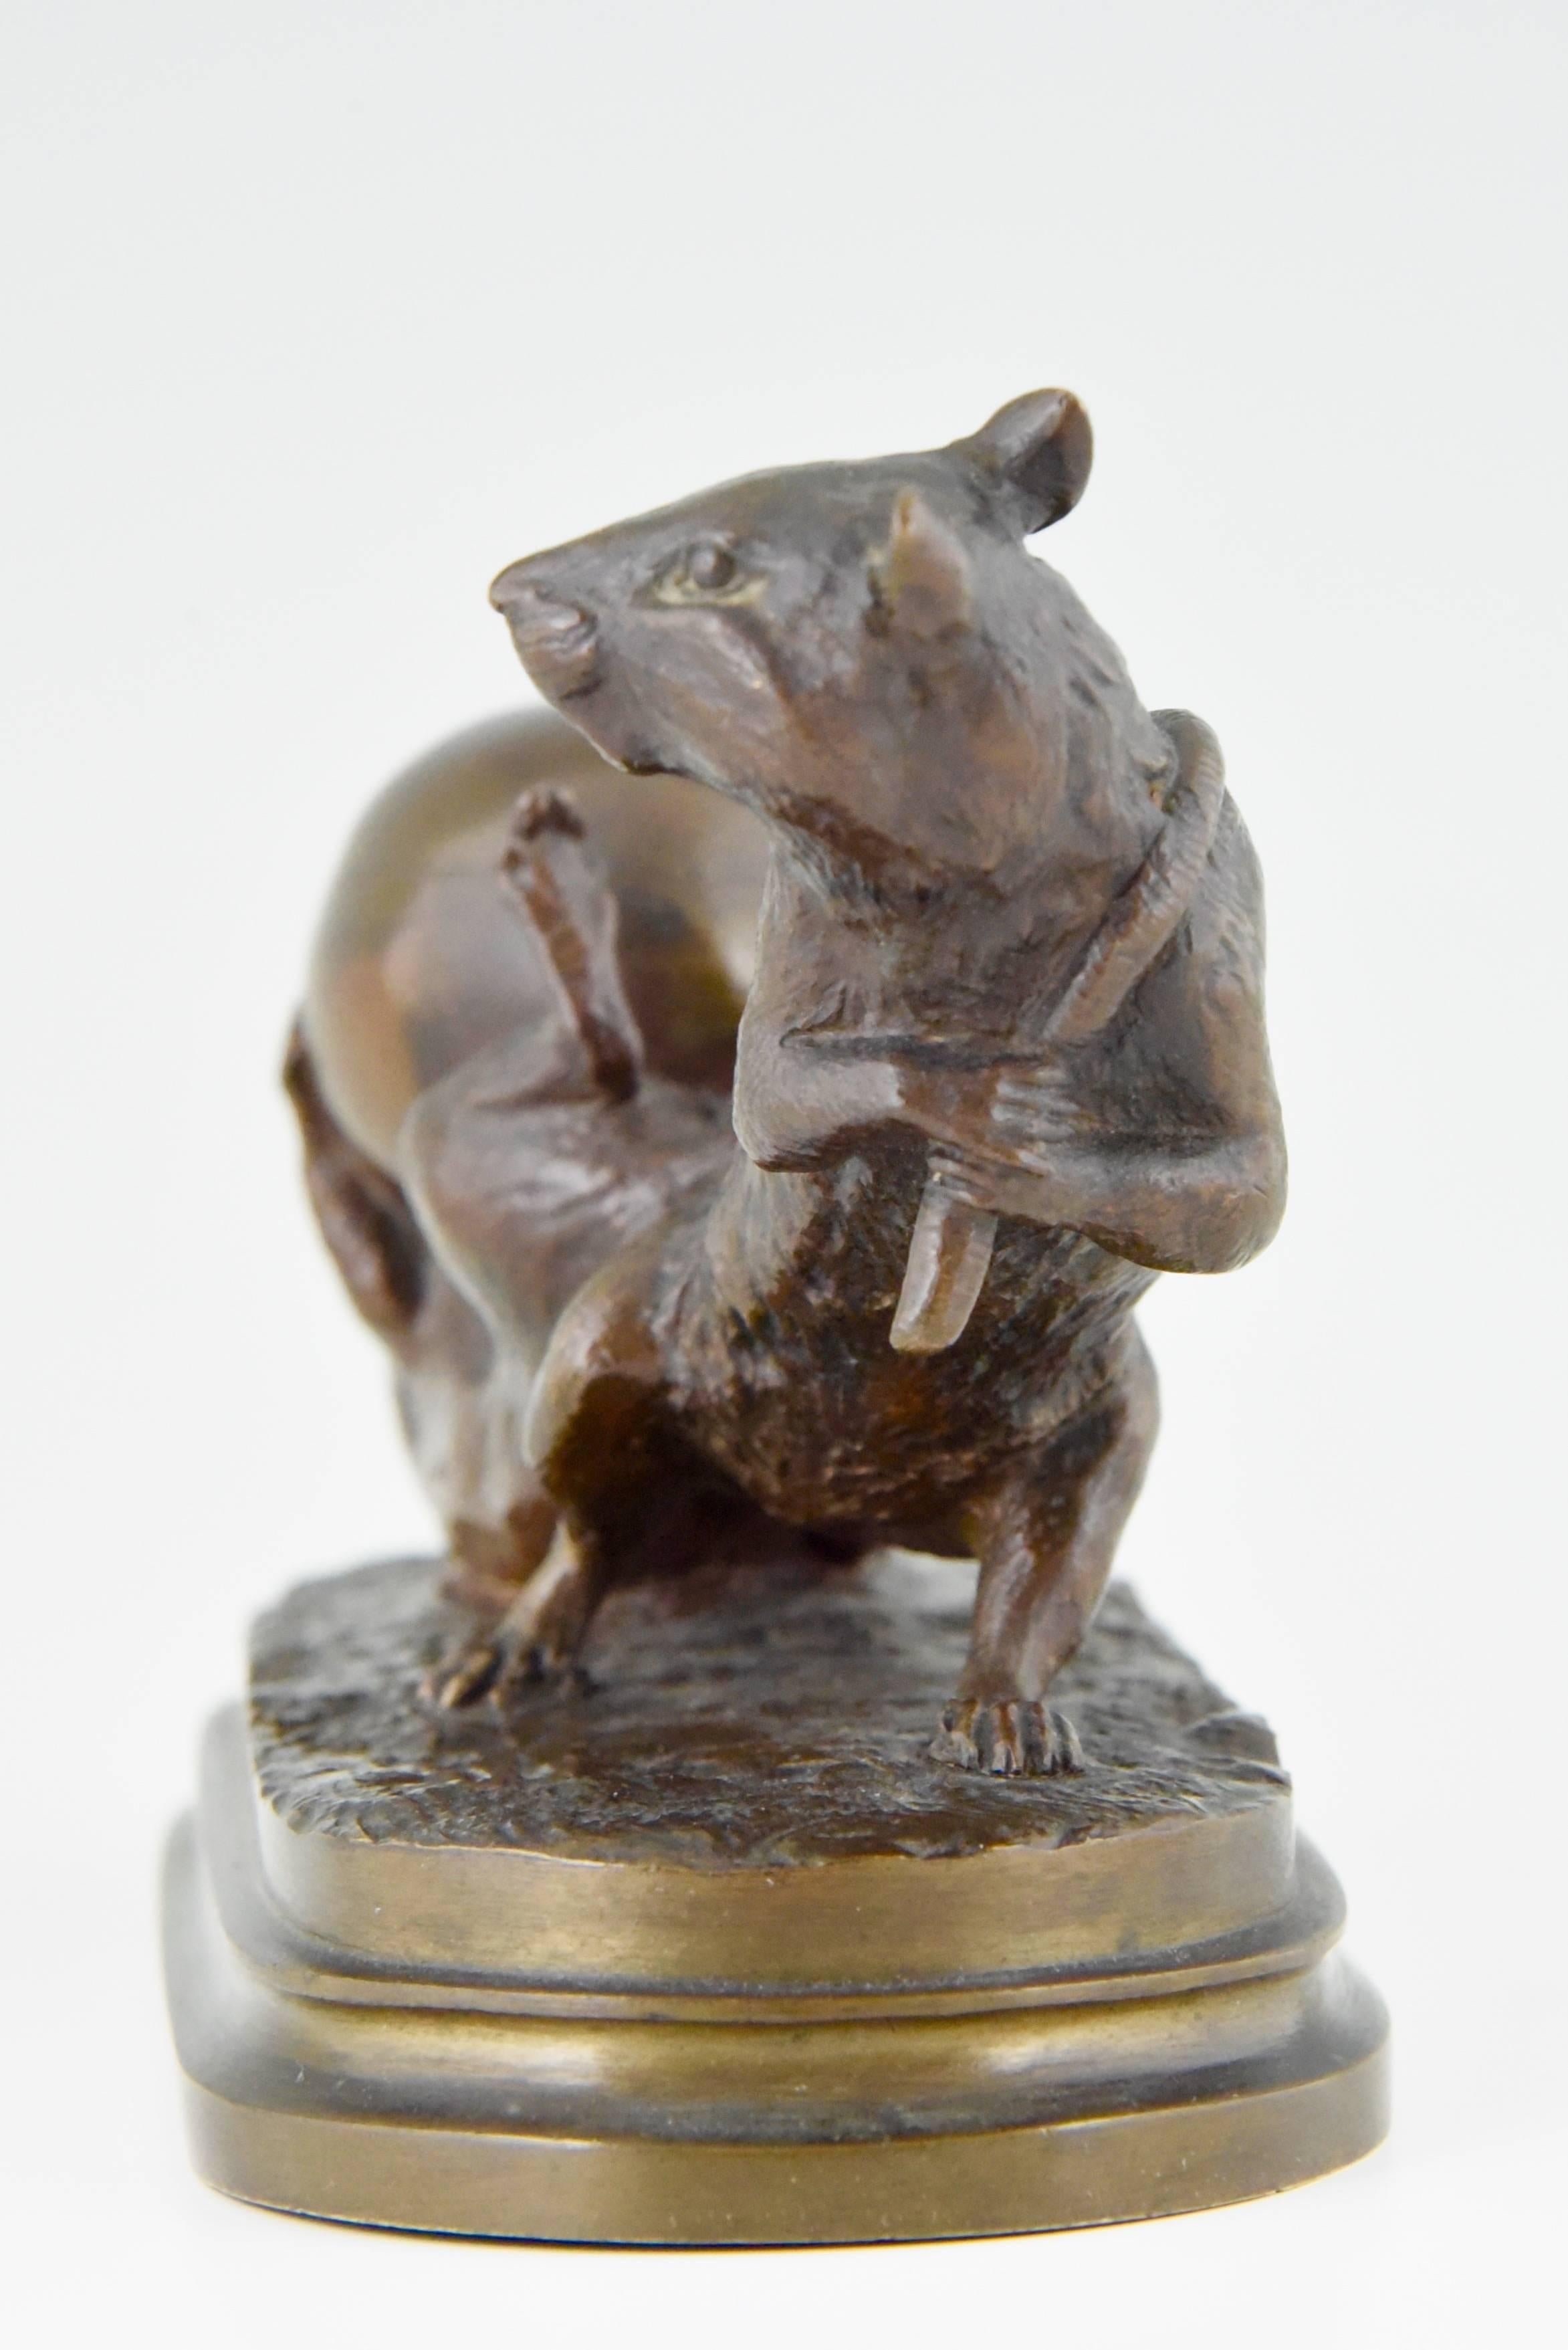 19th Century French Antique bronze sculpture of two mice & egg by Isidore Bonheur 1880